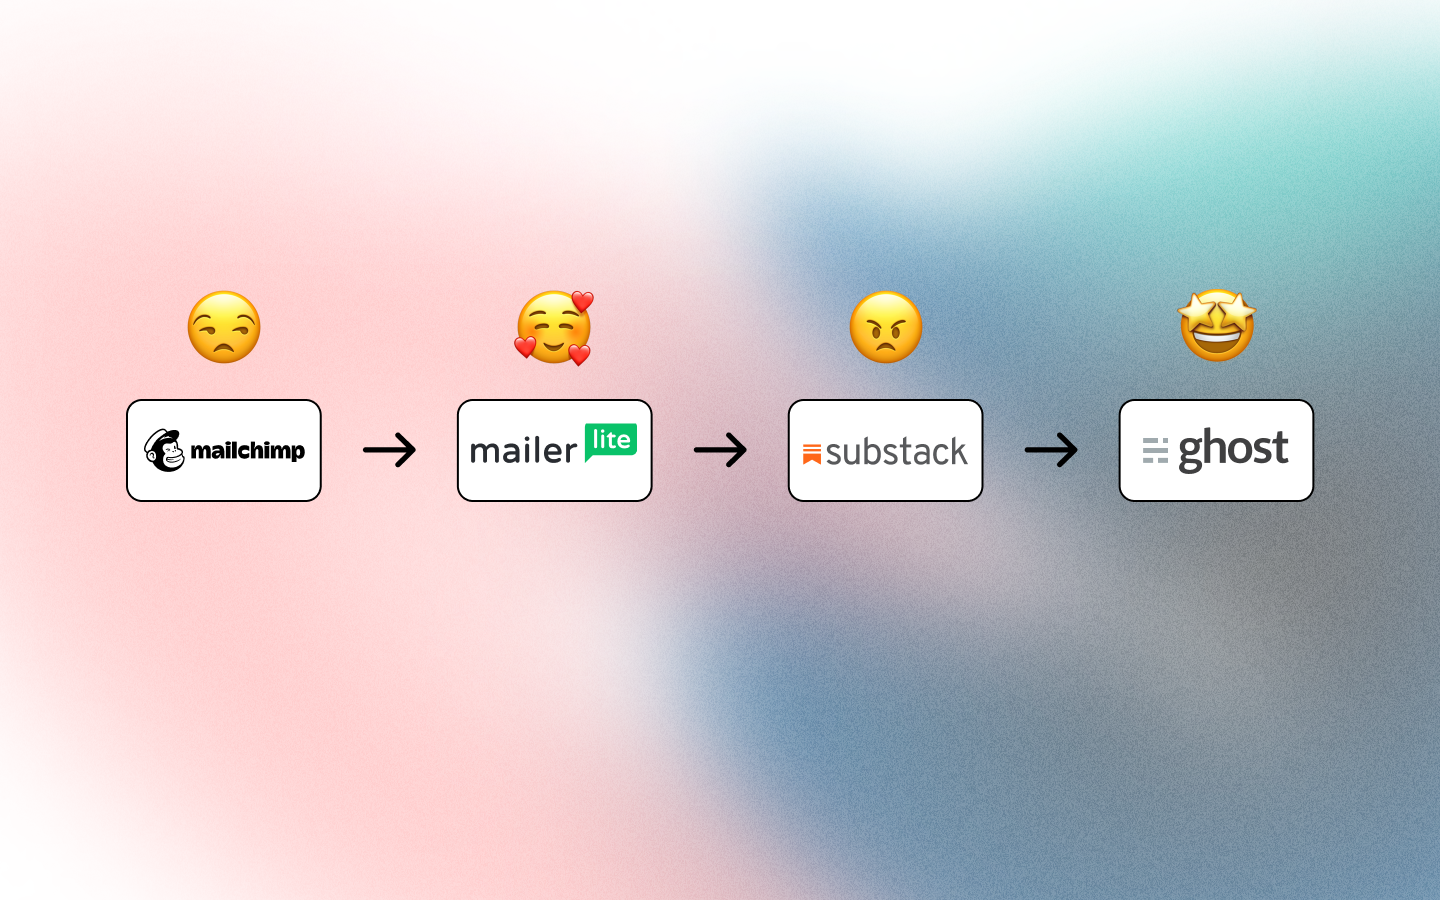 Image visualizing moving my newsletter from Mailchimp to Mailerlite to Substack to Ghost.